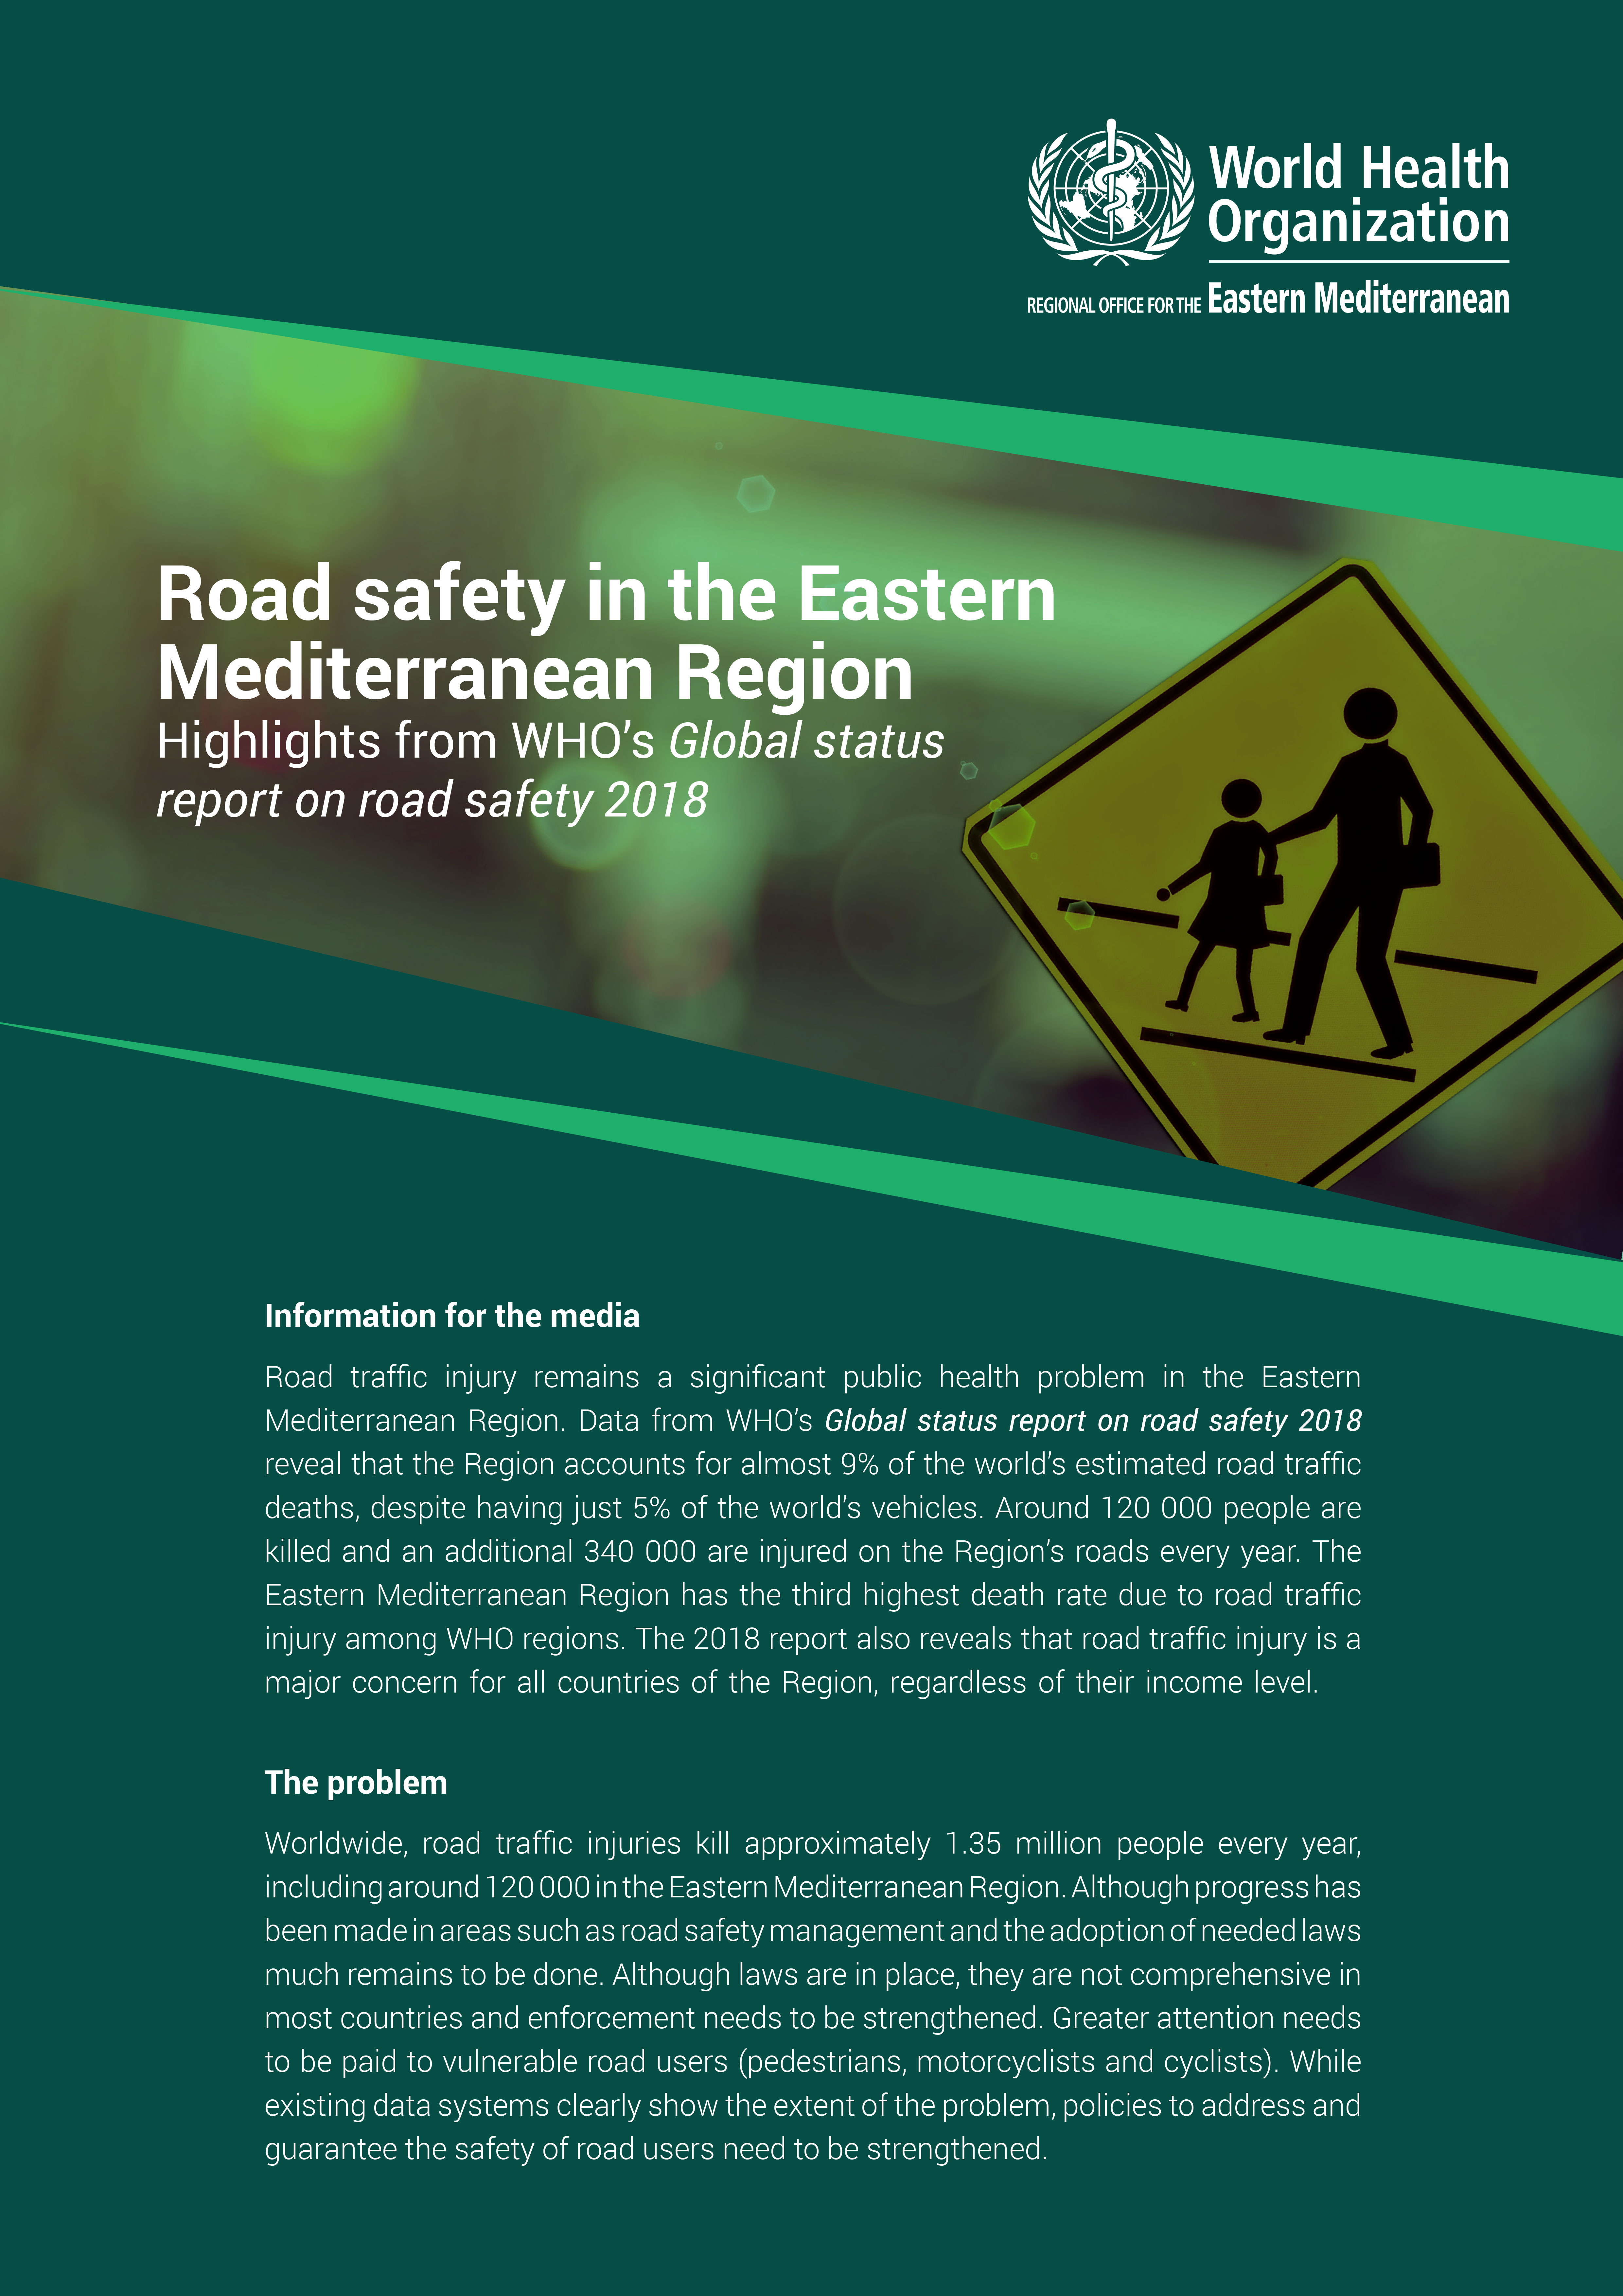 Road safety in the Eastern Mediterranean Region: highlights from WHO’s Global status report on road safety 2018